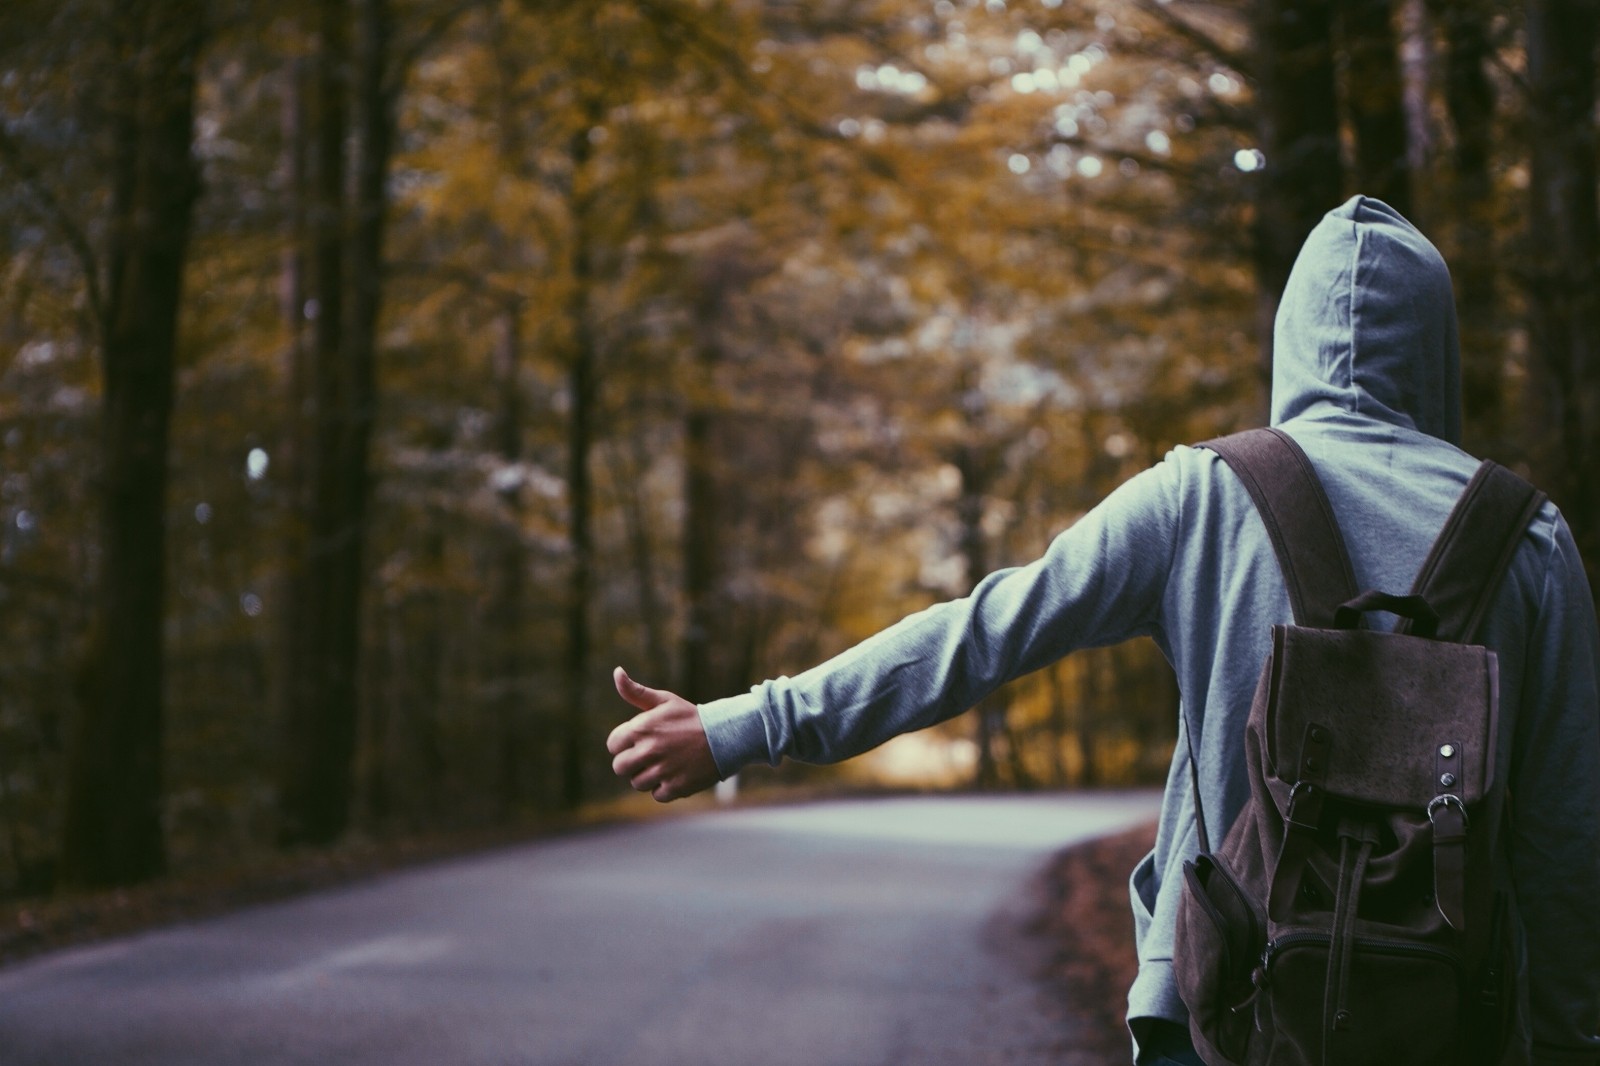 hitch-hiker-wearing-hood-on-road-in-forest